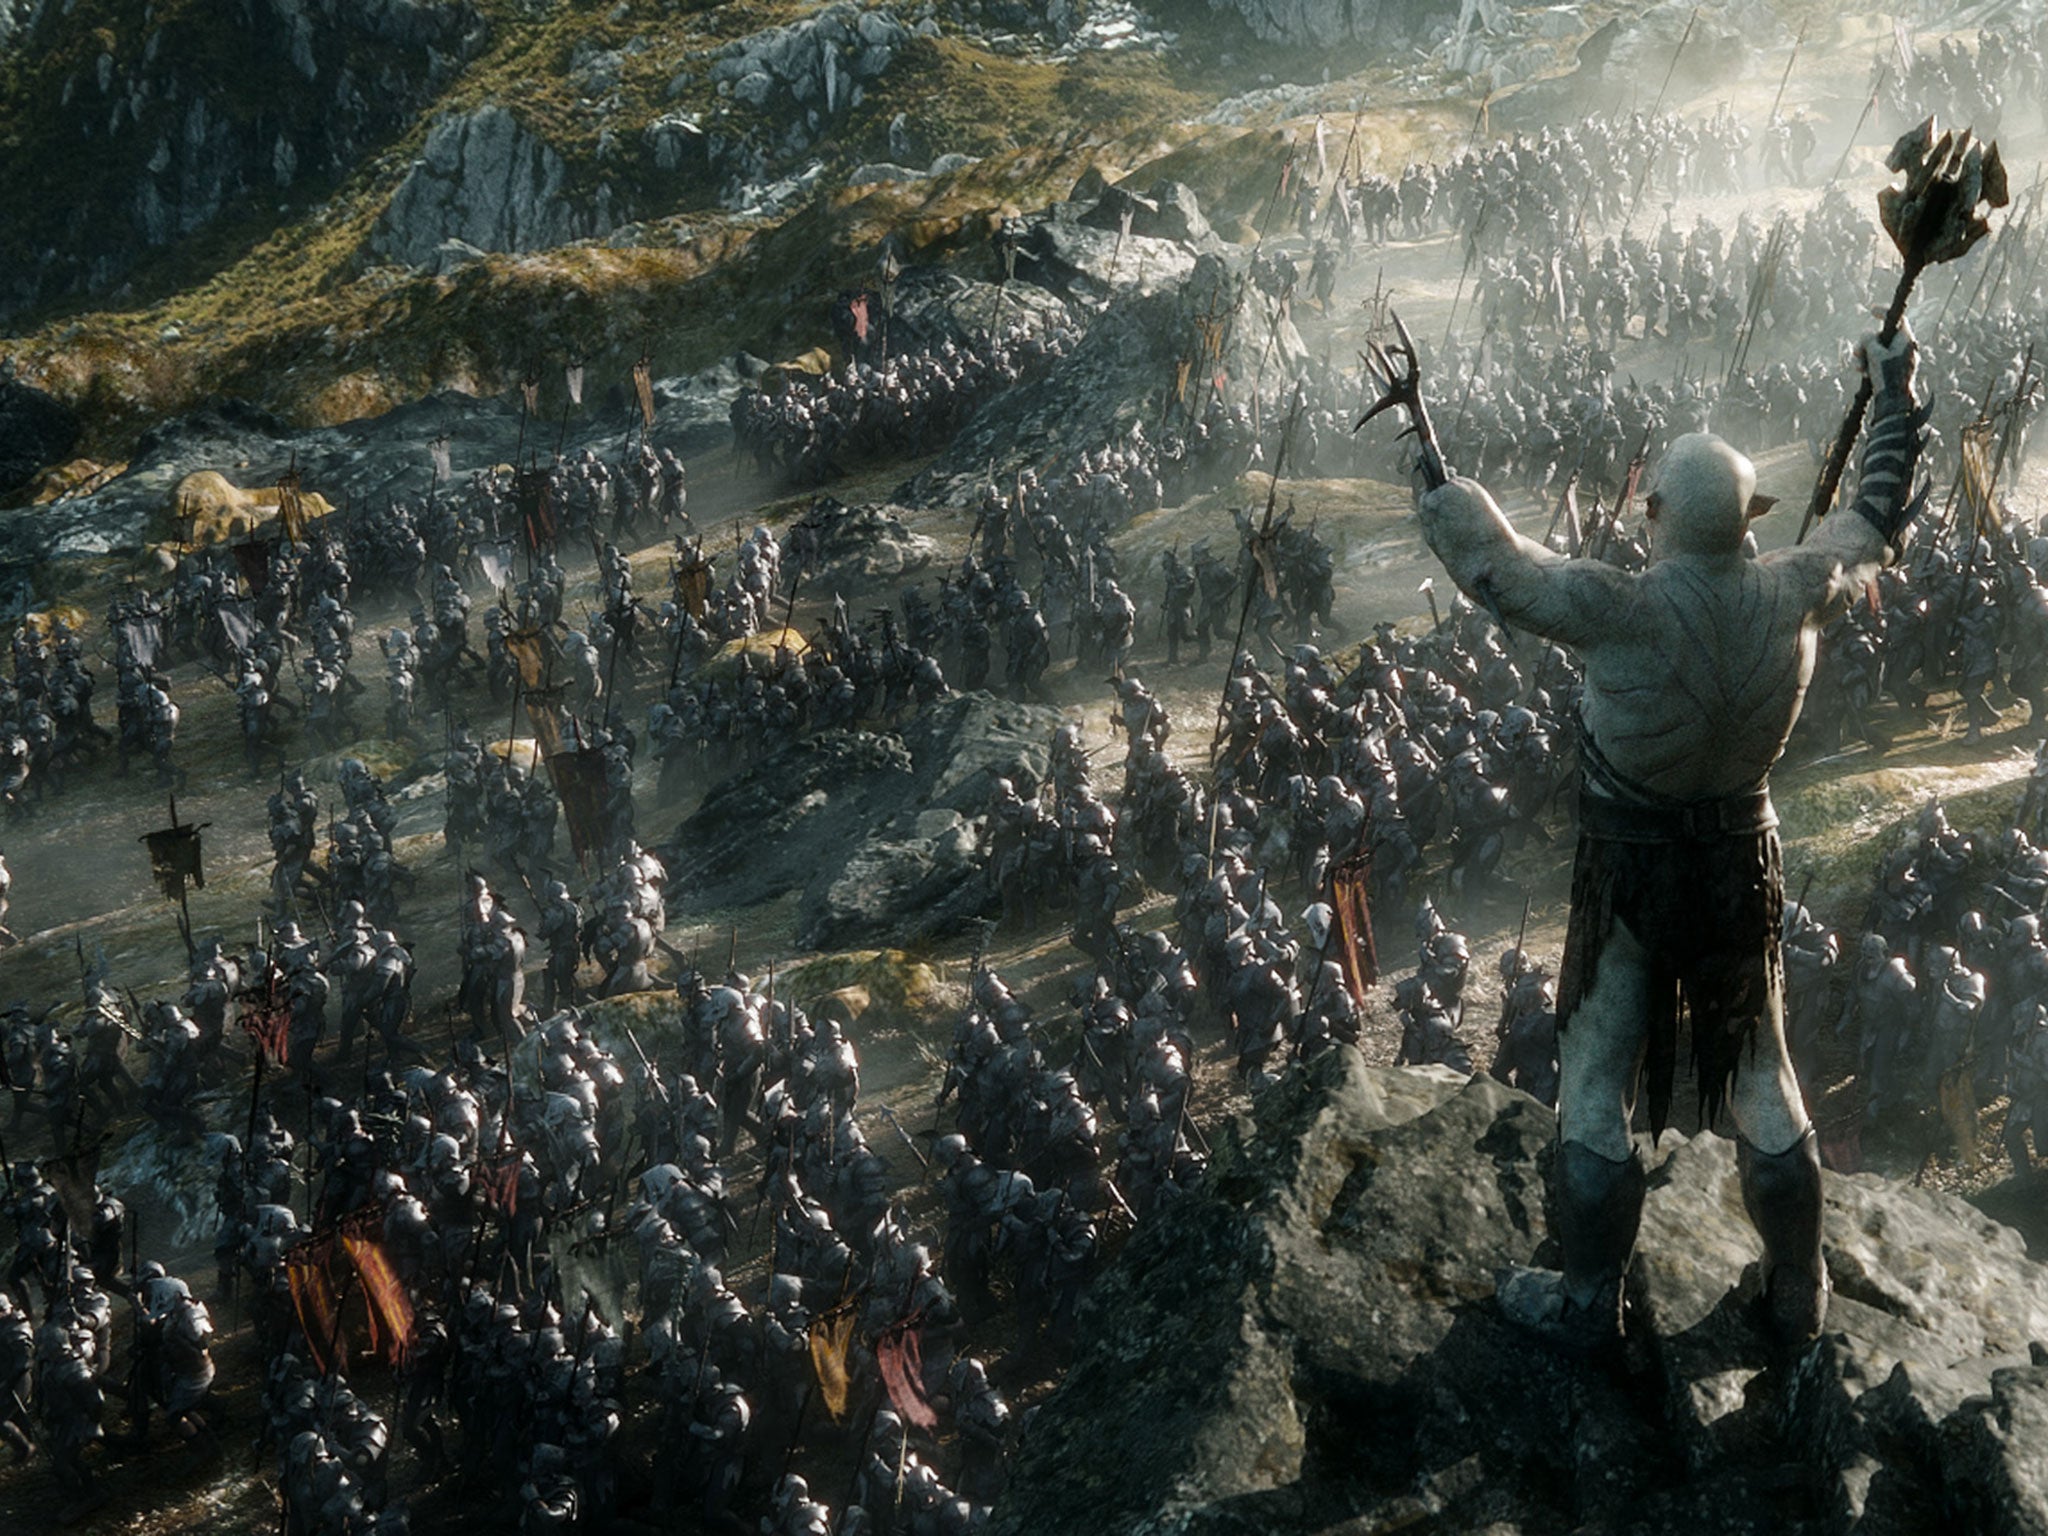 The Hobbit: The Battle of the Five Armies is a dramatic conclusion to Peter Jackson's trilogy